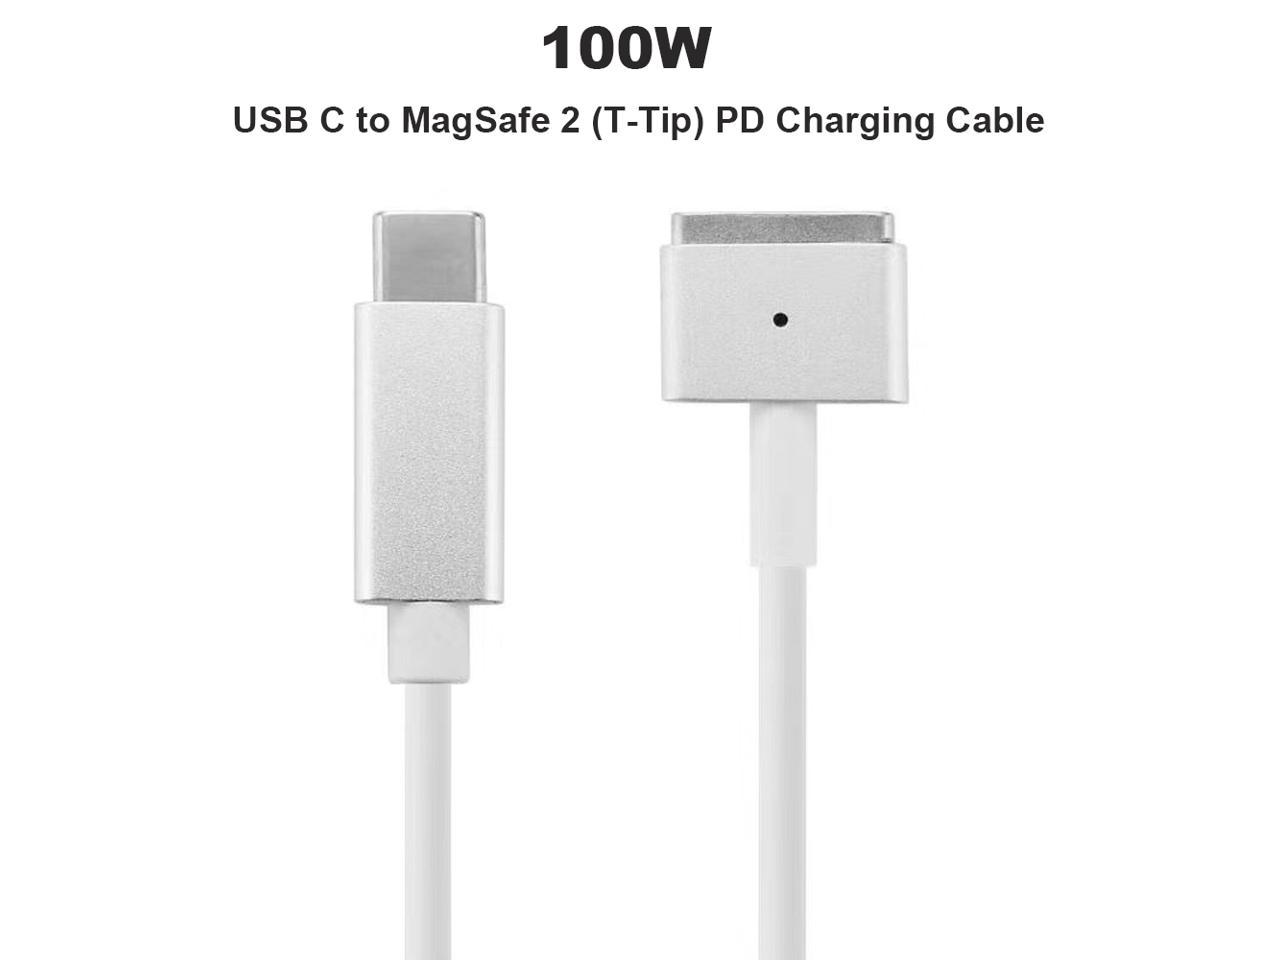 HF-LTMF8: 6ft USB-C to Magsafe 2 T-shaped PD charging Cable (support up to 100W)